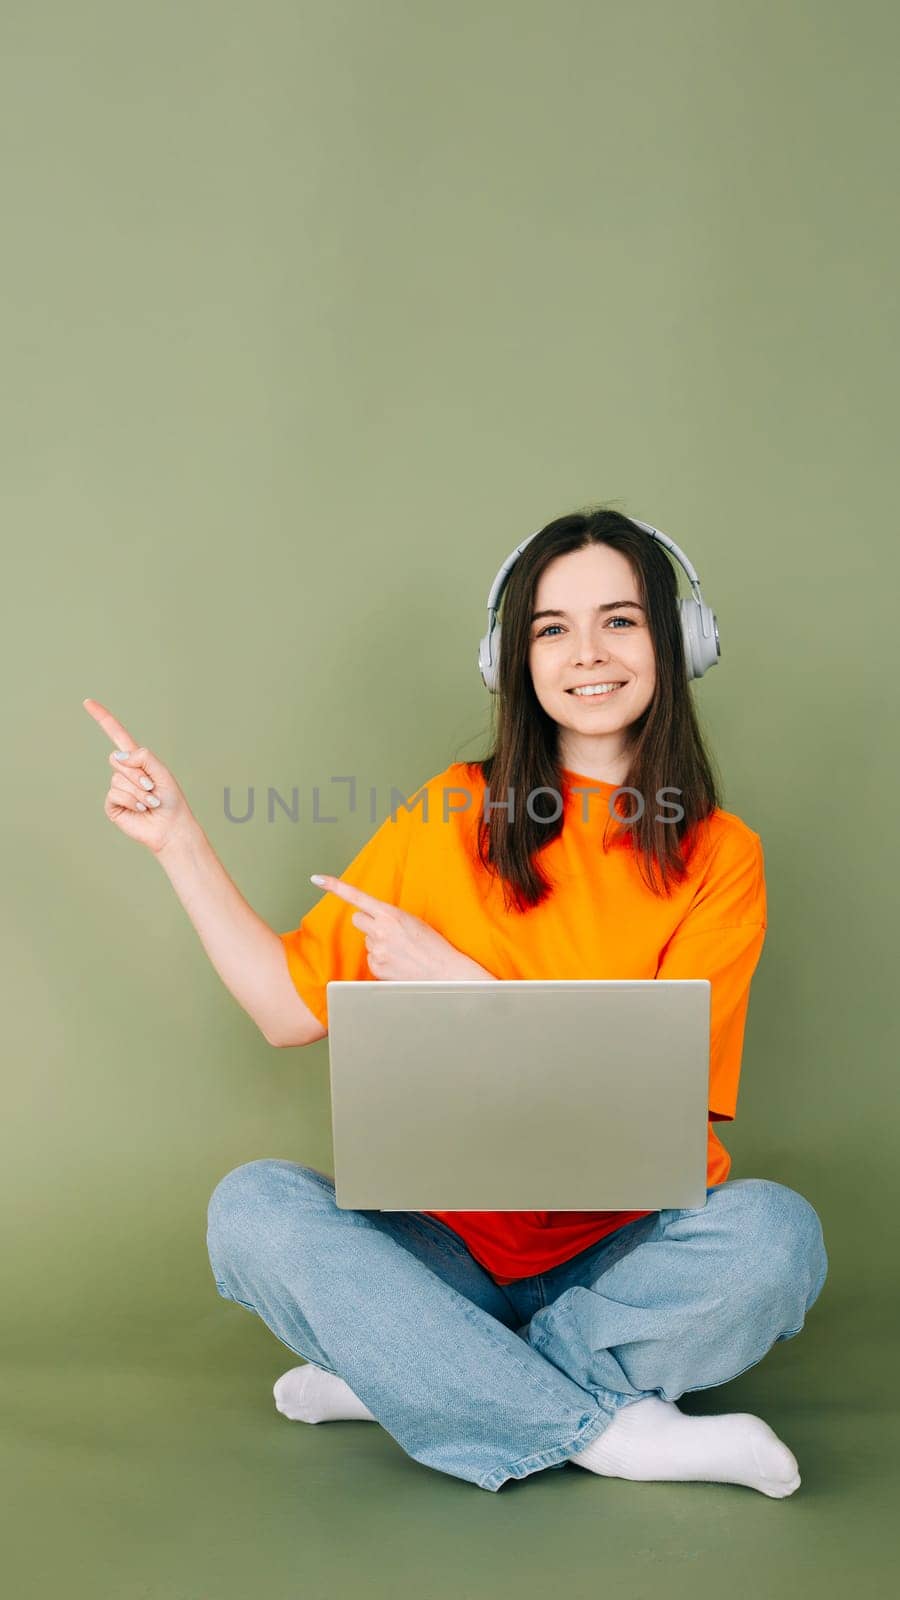 Young professional woman confidently working on laptop, pointing to empty space for text and advertising. Isolated on green background. Perfect for business and technology concepts. by ViShark